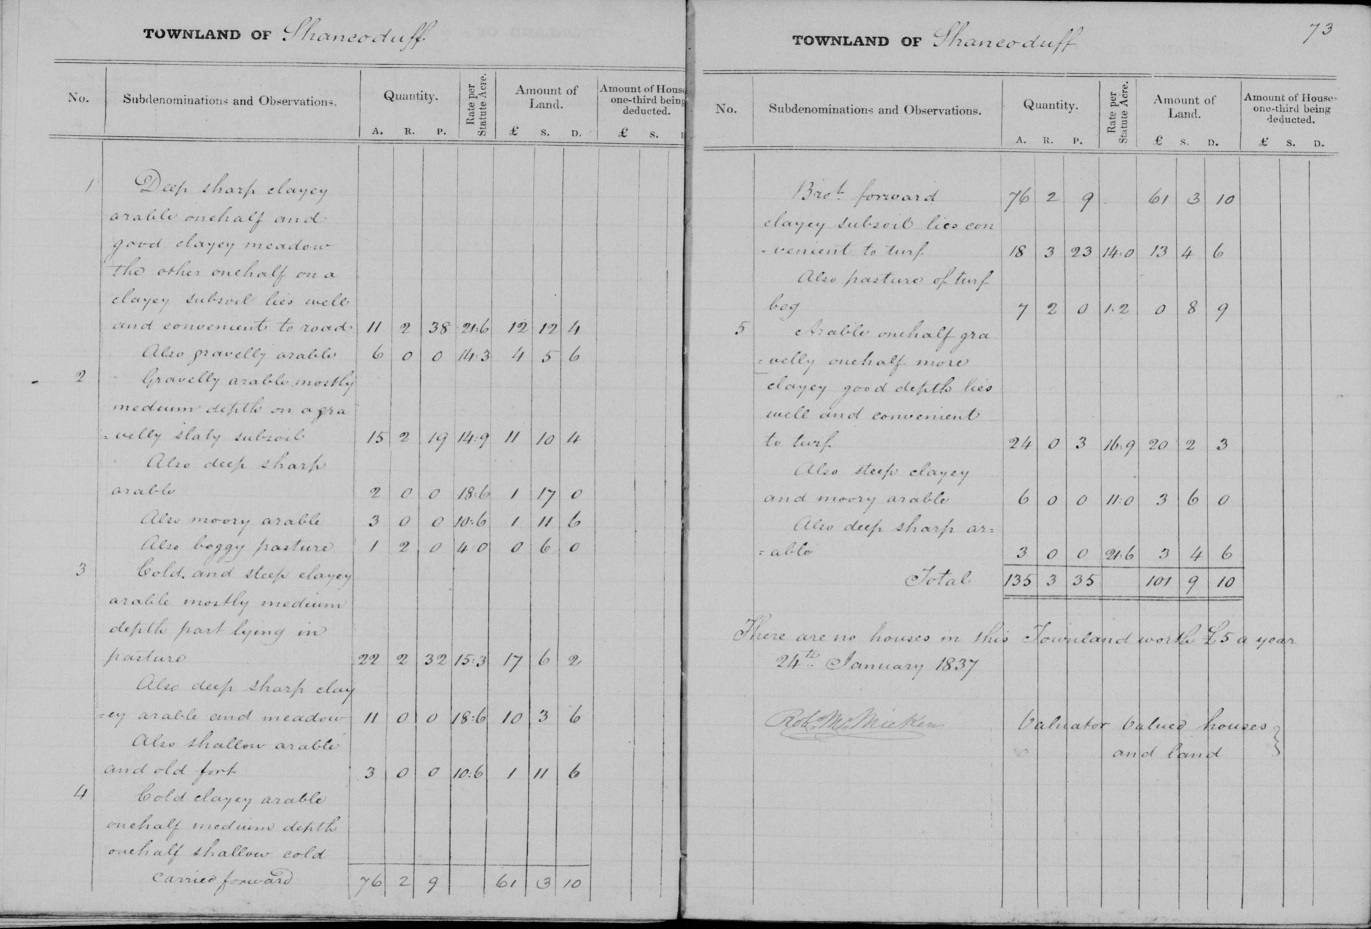 1837 01 24 Shancoduff Valuation Office Book from FMP 08 09 18 sm 50